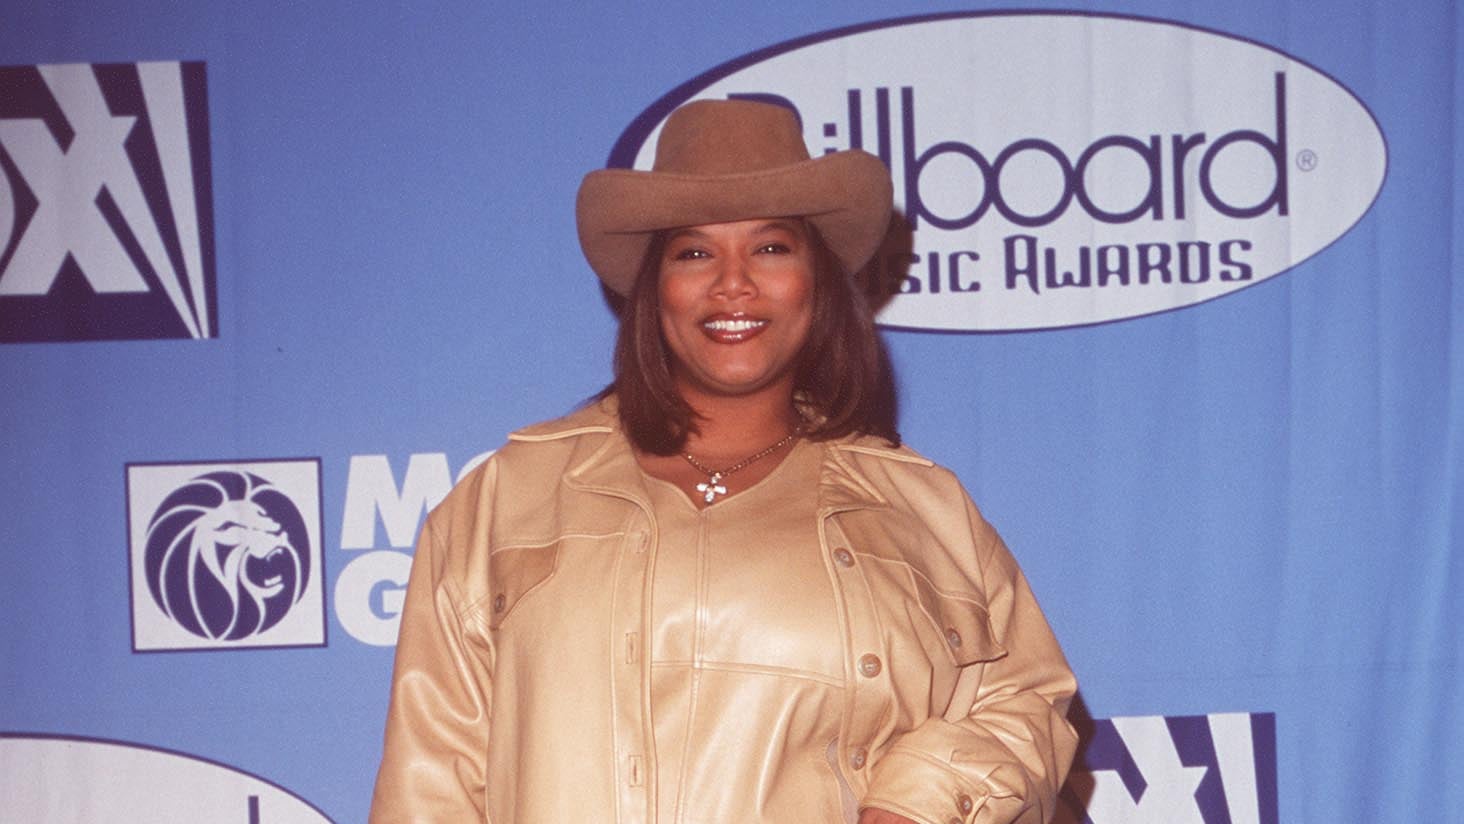 Channeling Nostalgia With This Celebrity Look: Queen Latifah